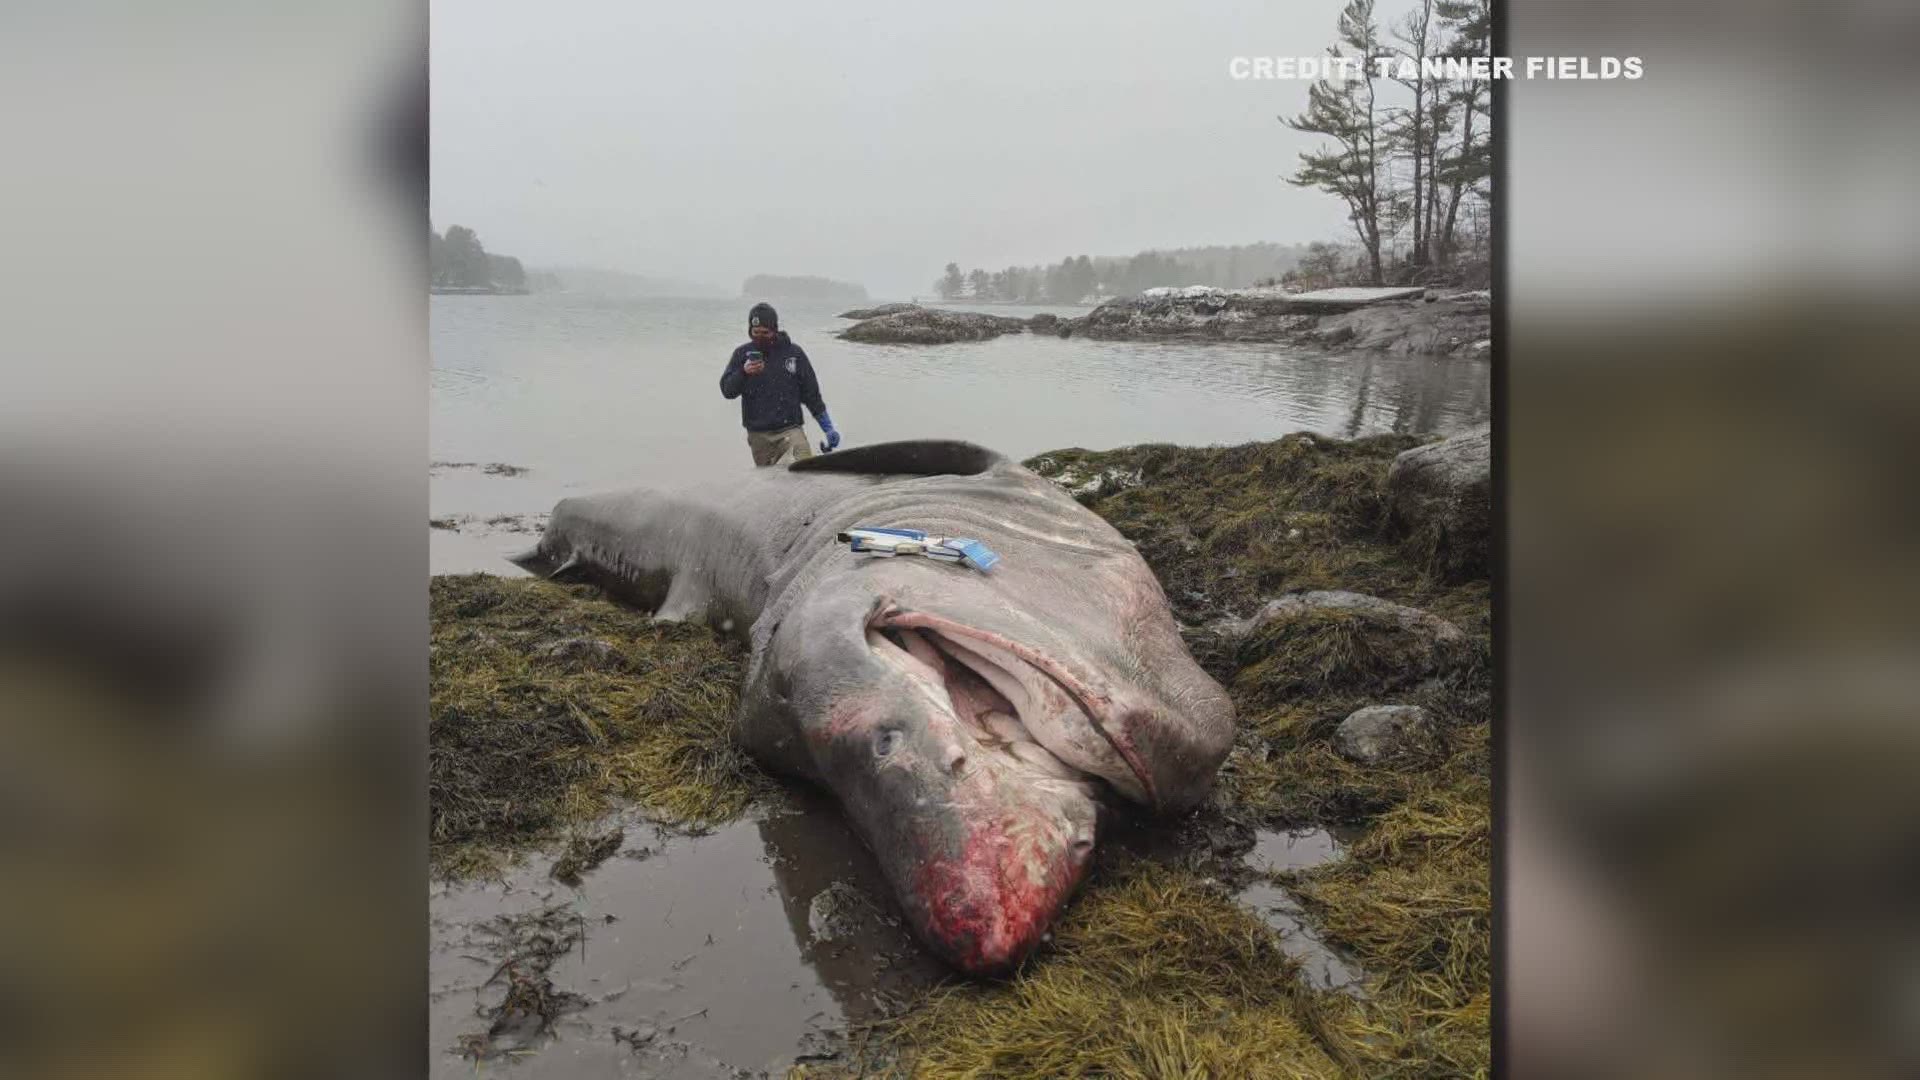 The shark was found in Greenland Cove in Bremen Tuesday. Maine Dept. of Marine Resources was on site taking samples for genetic, dietary and aging analysis.